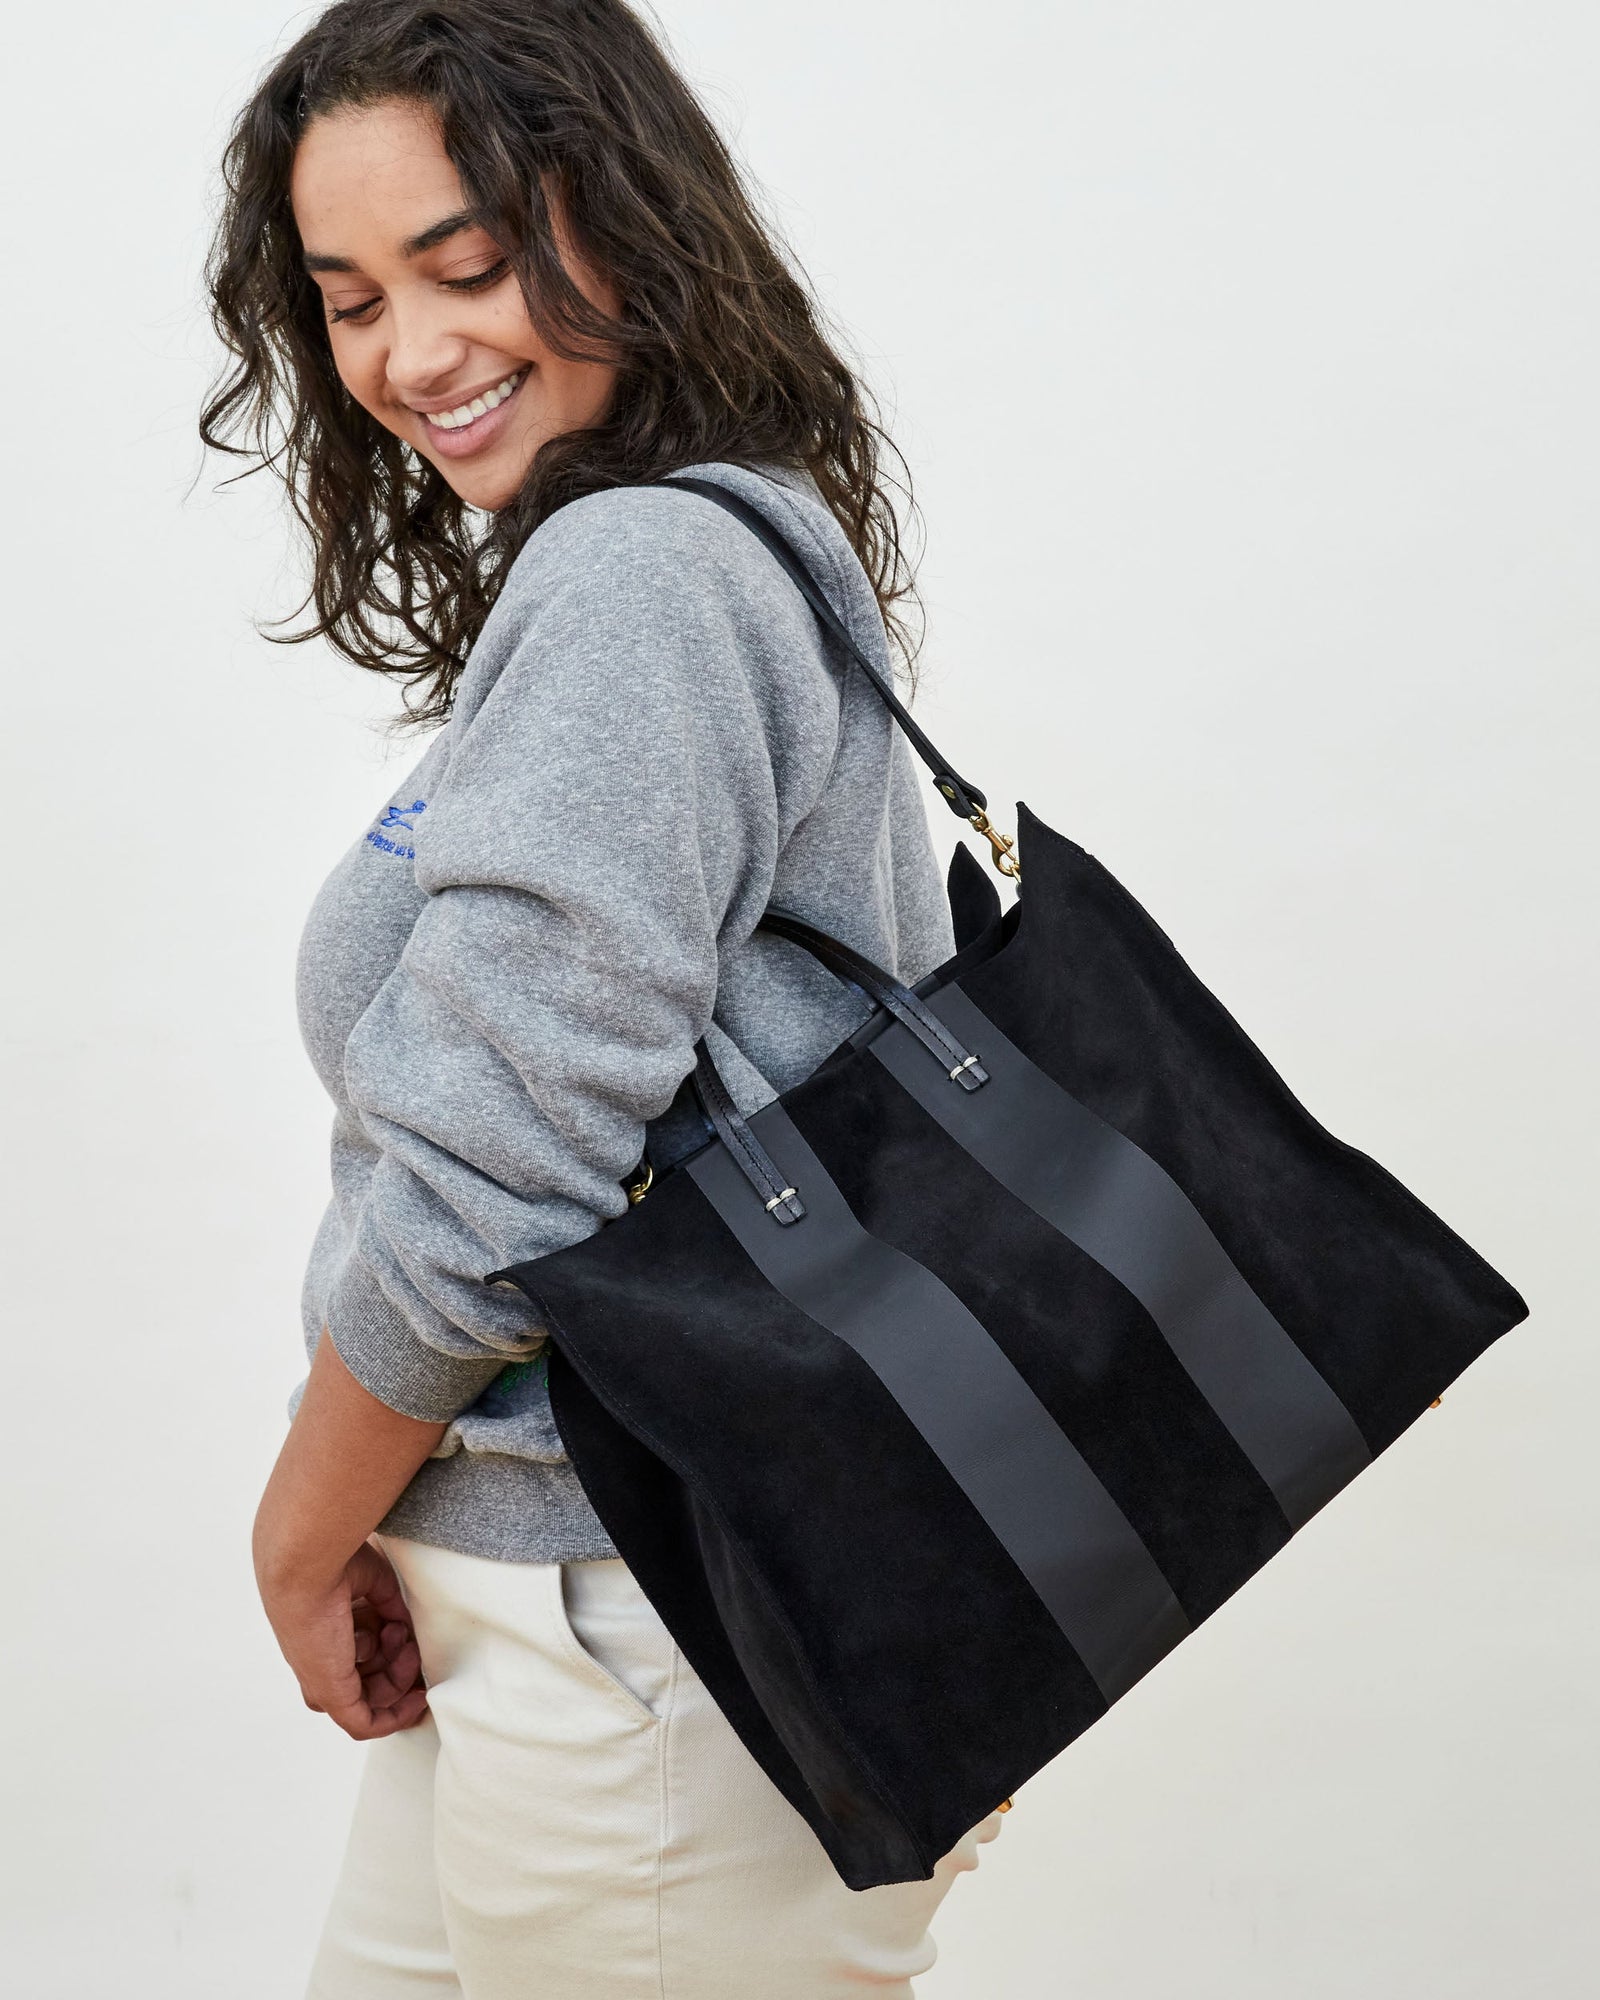 Claudia Wearing the  Black Suede with Matte Black Racing Stripes Simple Tote on Her Shoulder